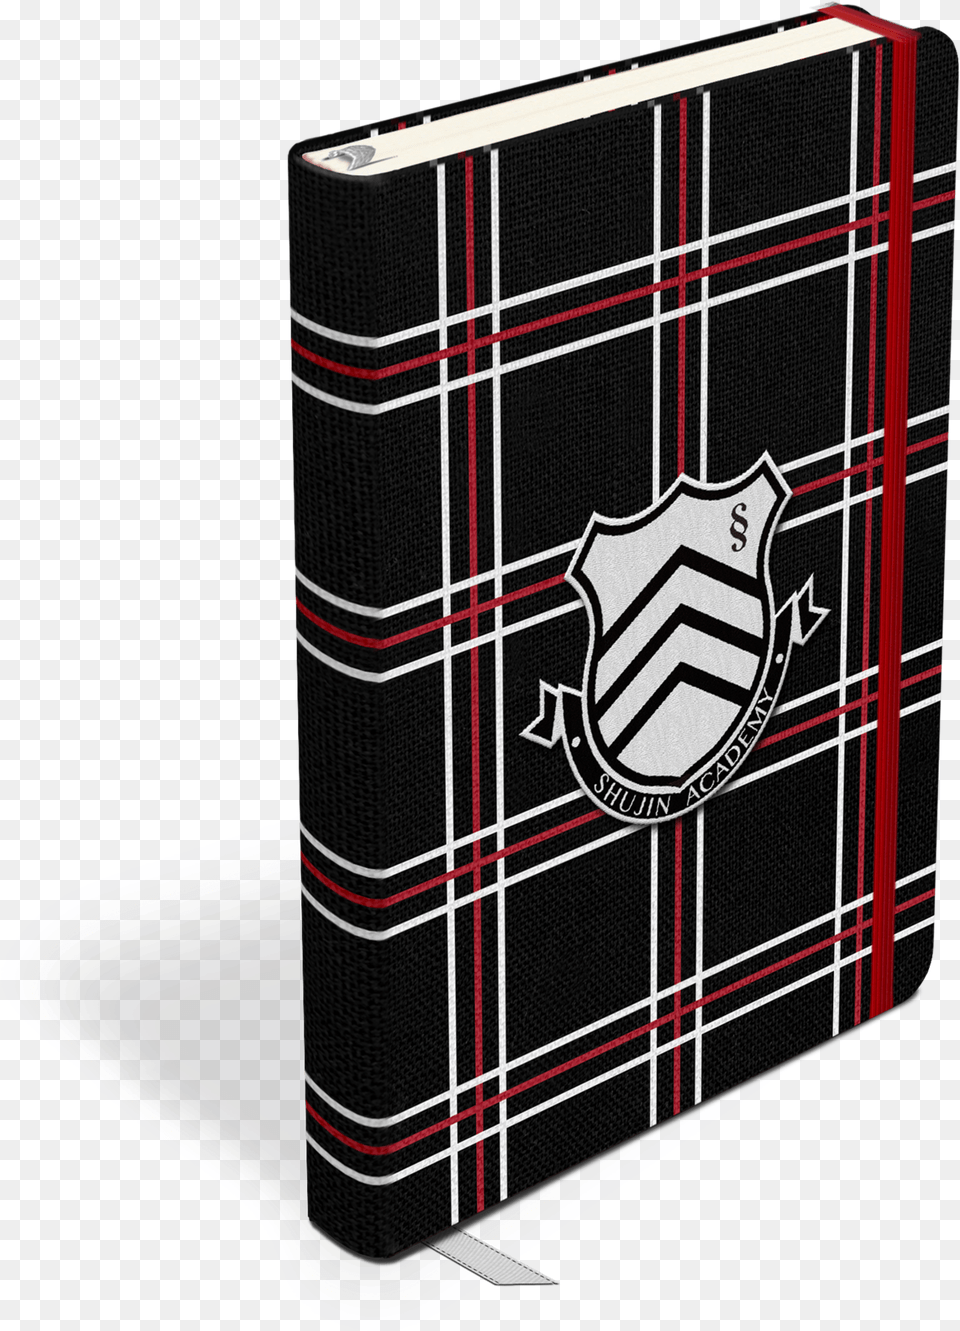 Persona 5 Notebook Filled With Concept Art Persona 5 Notebook, Tartan, Scoreboard Free Png Download